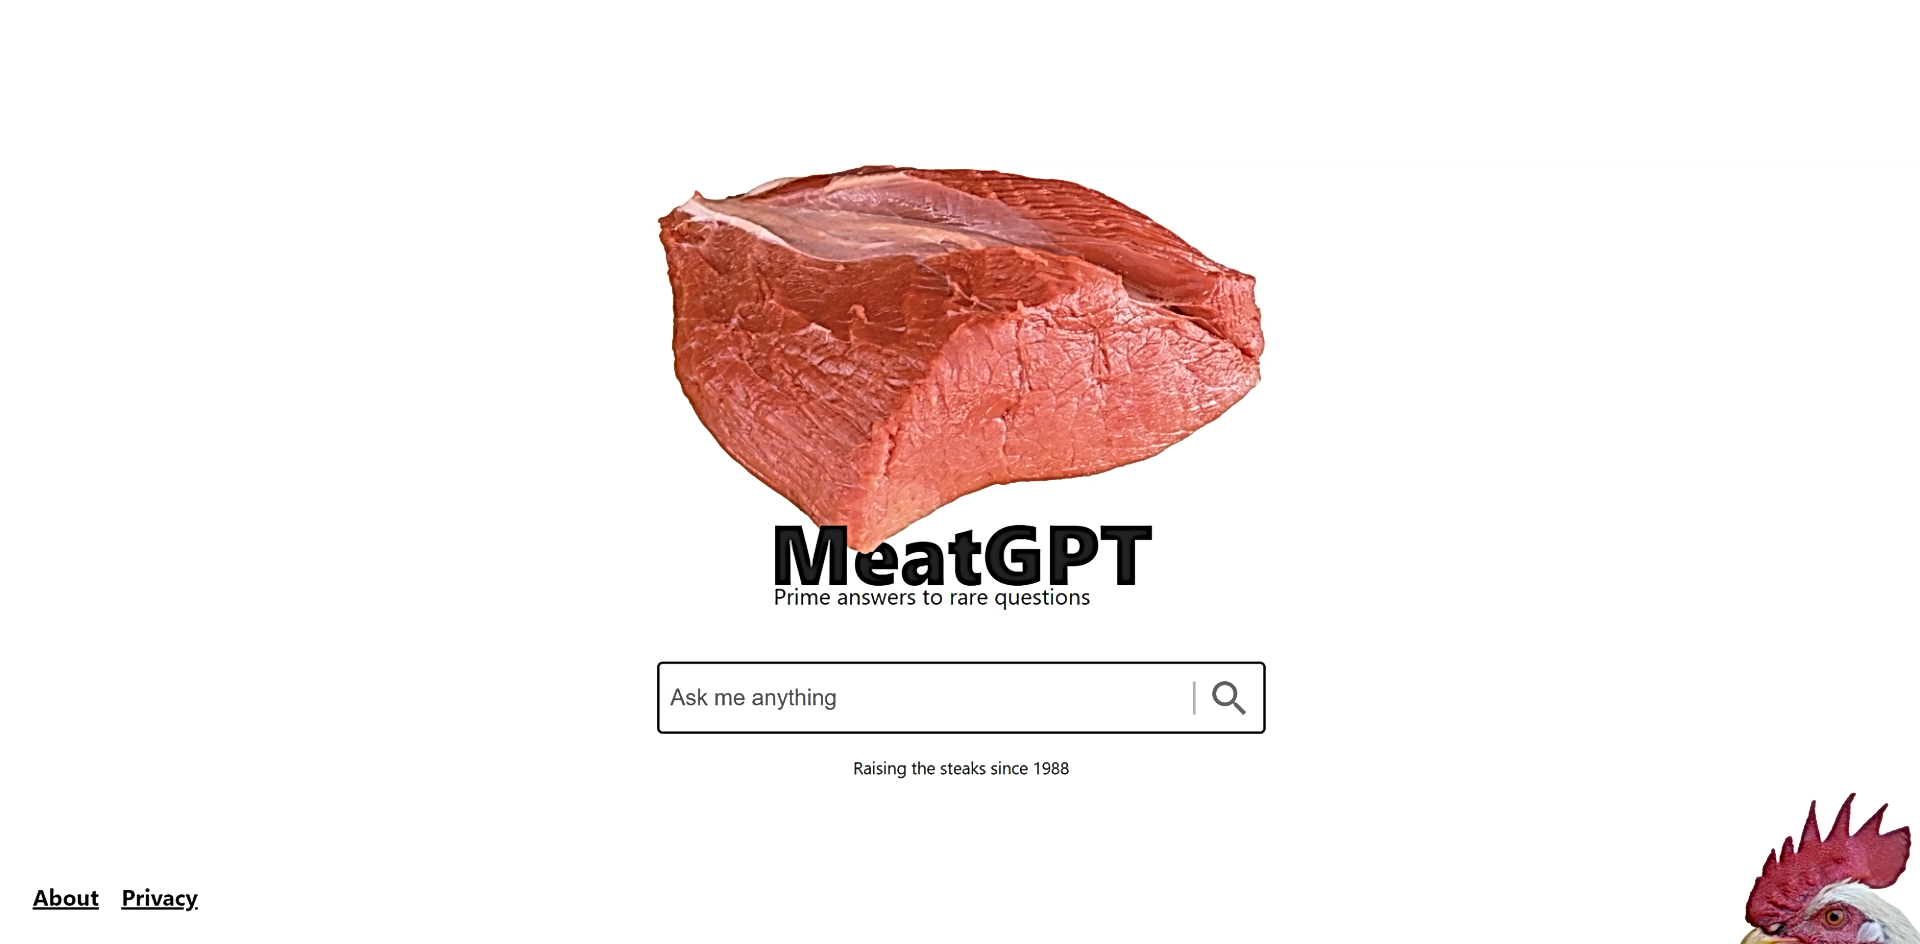 MeatGPT featured